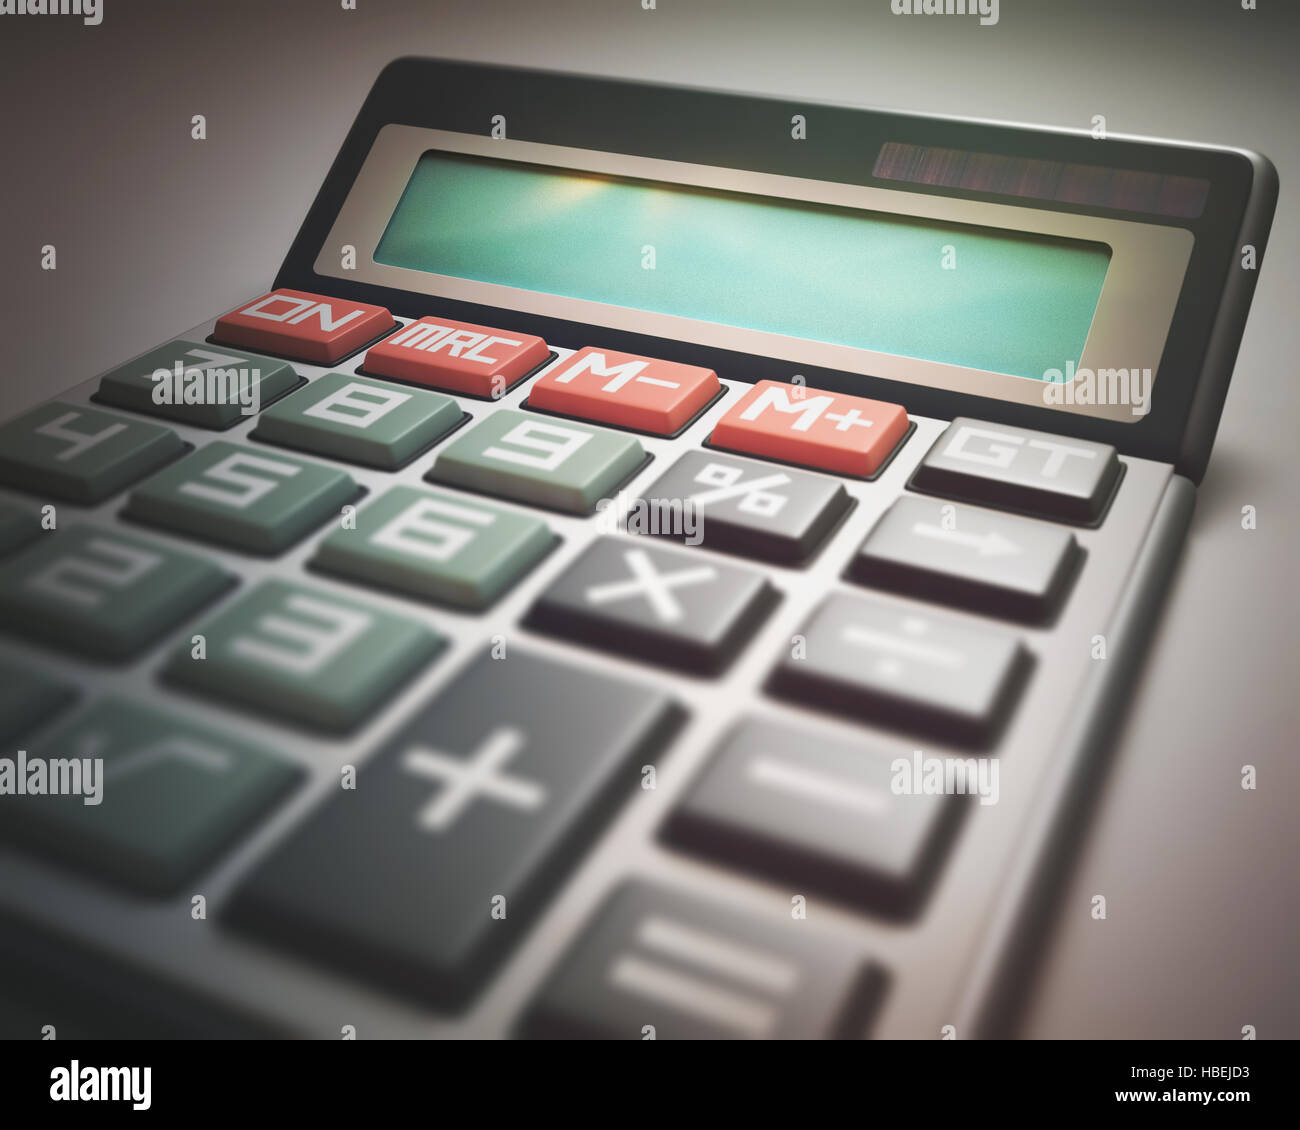 Solar calculator with digital display blank. Your text or number on display. Stock Photo